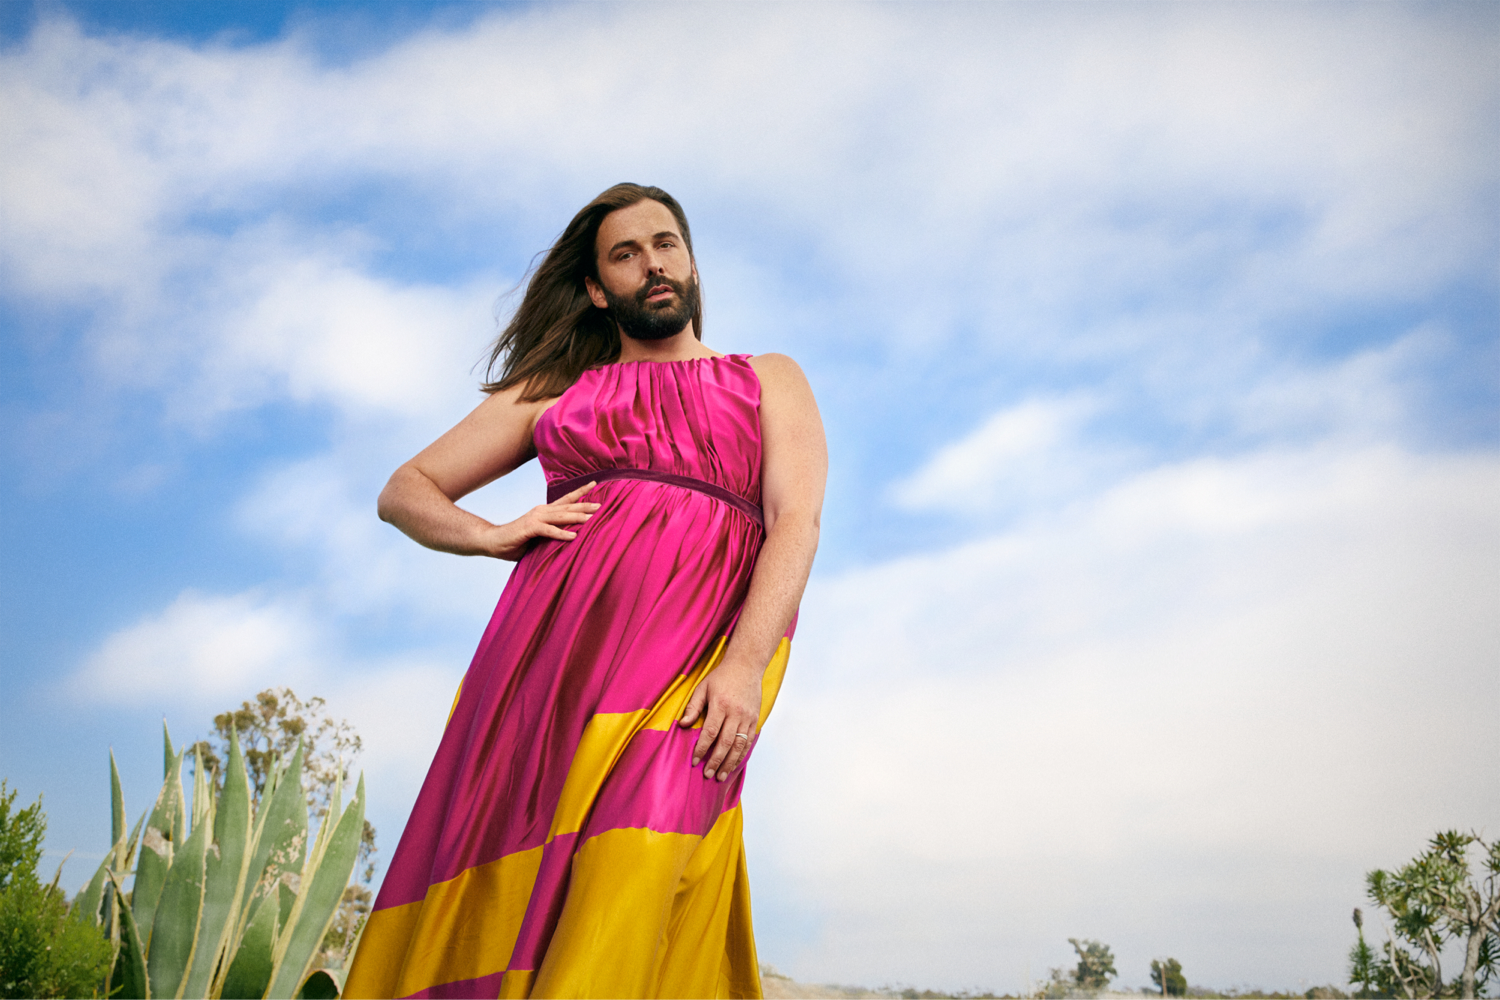 Jonathan Van Ness wearing a pink and yellow dress against a blue sky backdrop